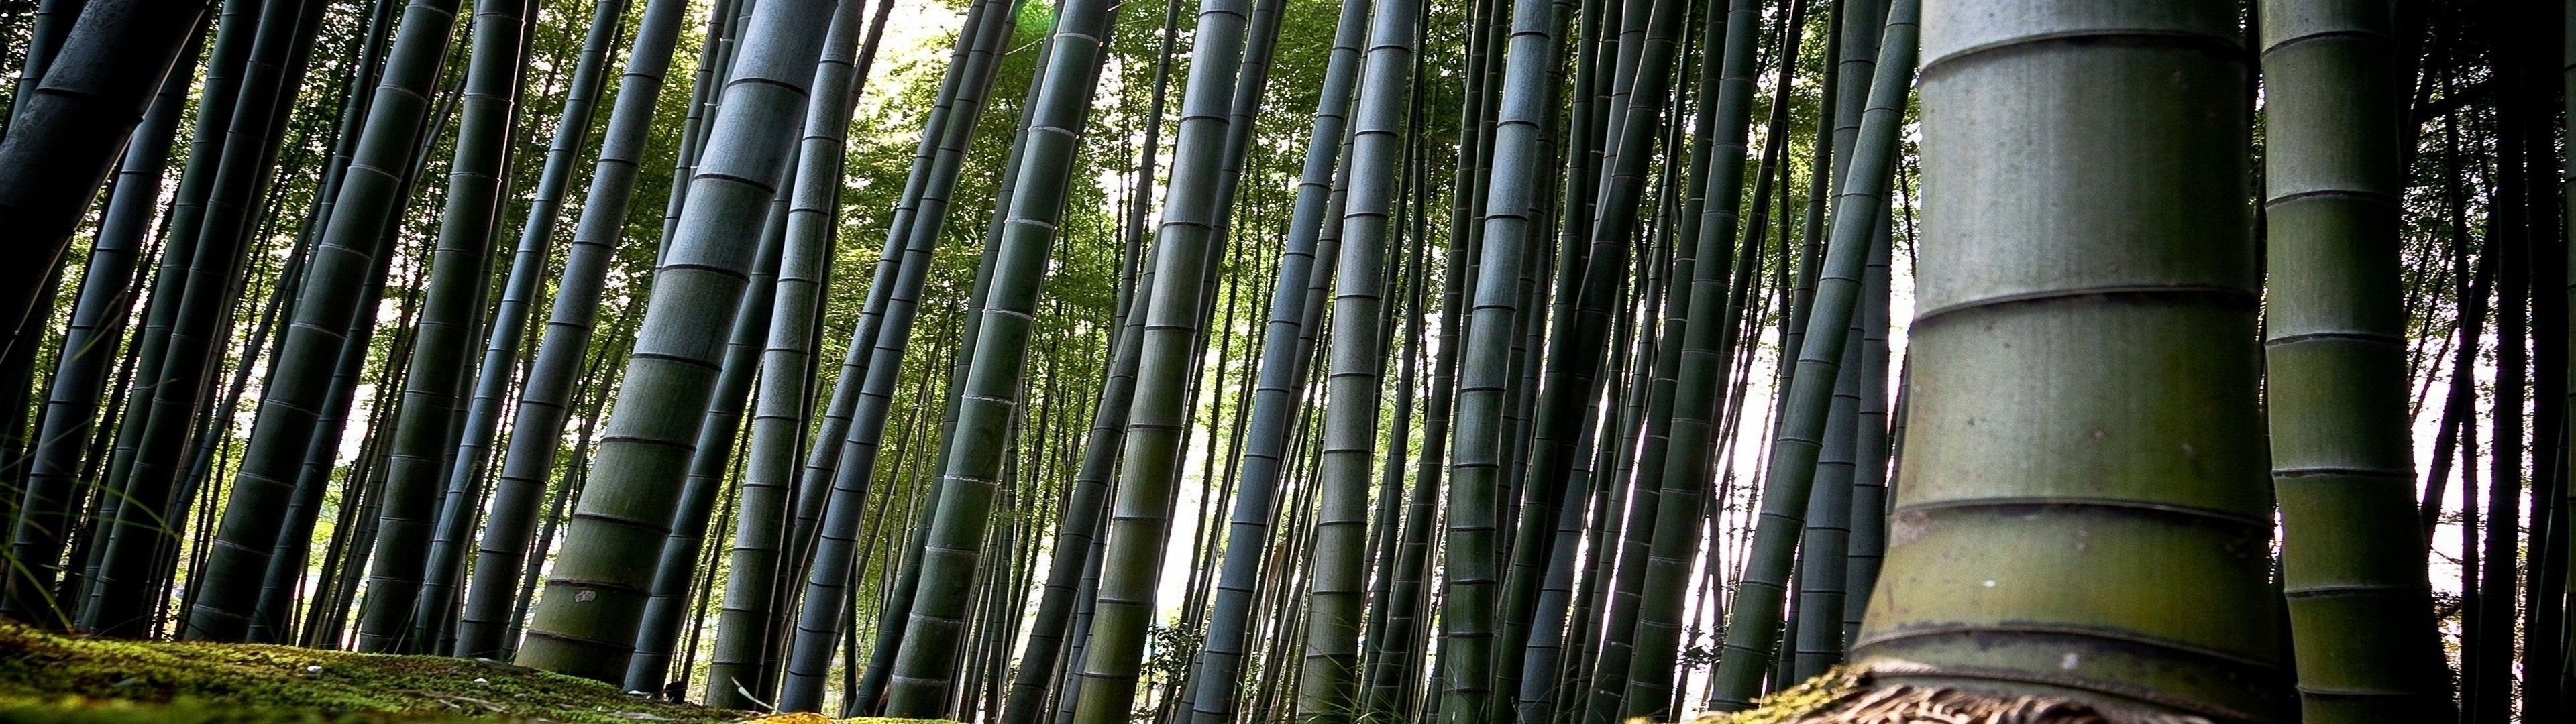 Bamboo: The jointed stem of the plant used for building furniture and utensils. 3840x1080 Dual Screen Background.